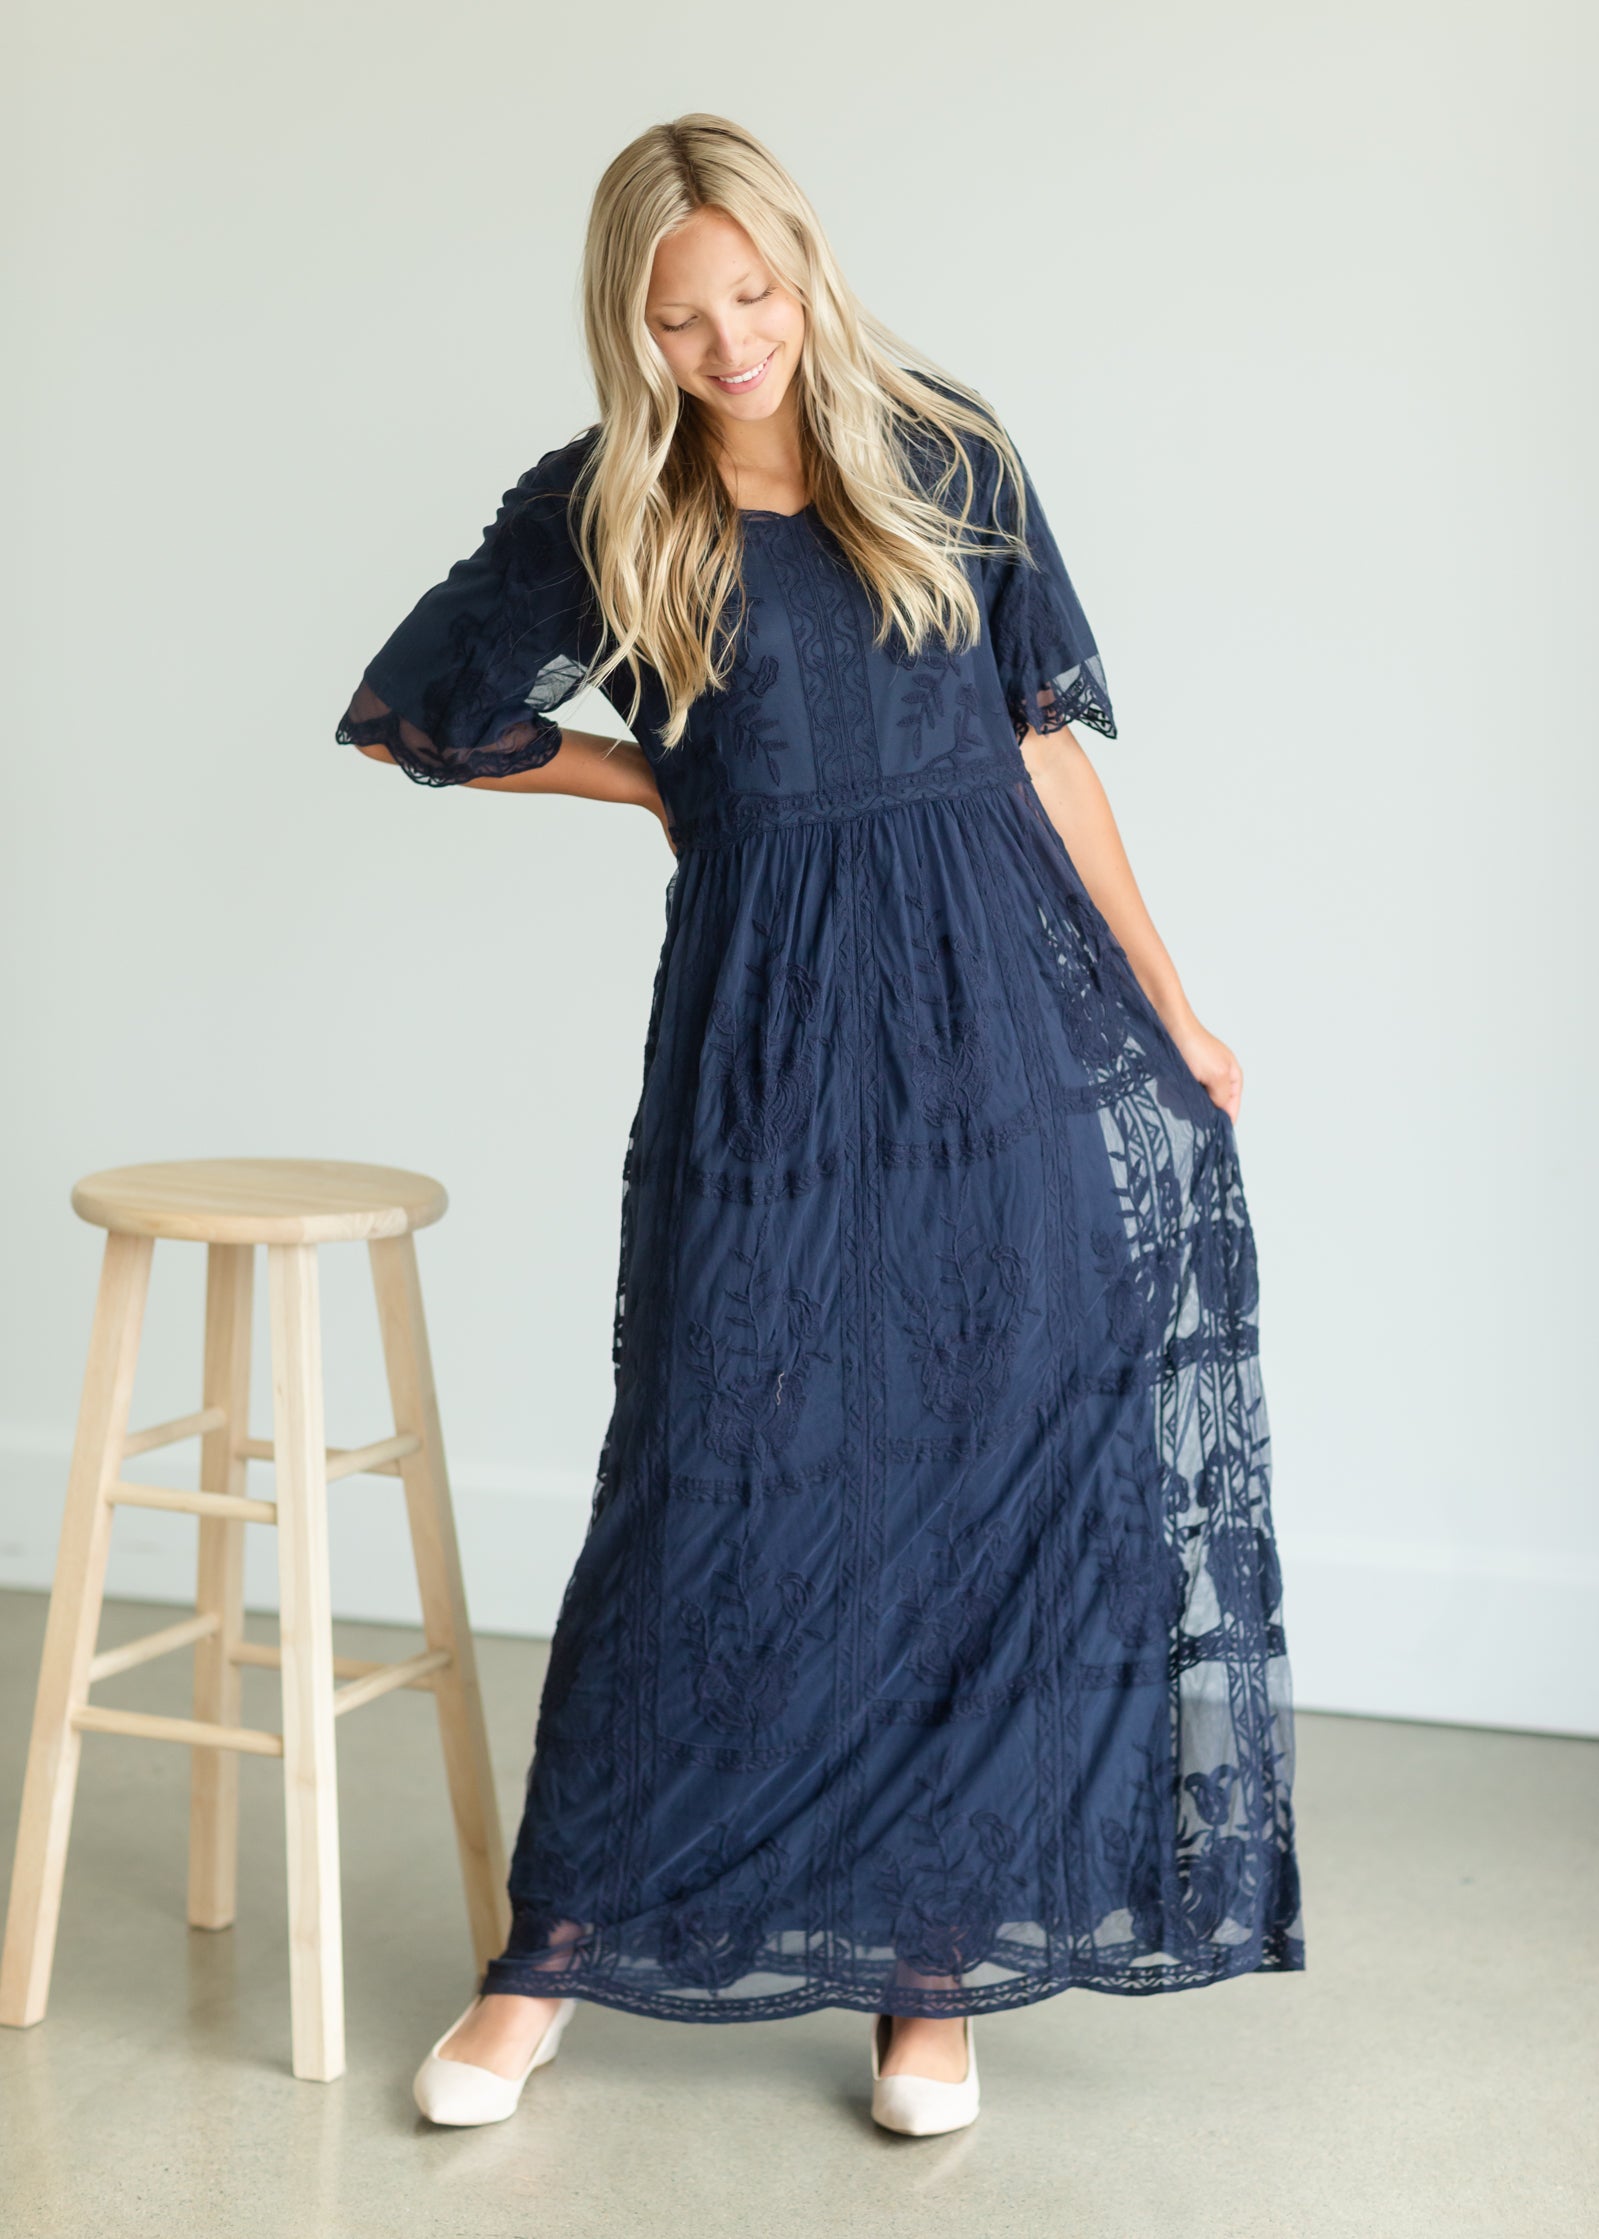 Lace Overlay Bell Sleeve Maxi Dress - FINAL SALE Dresses